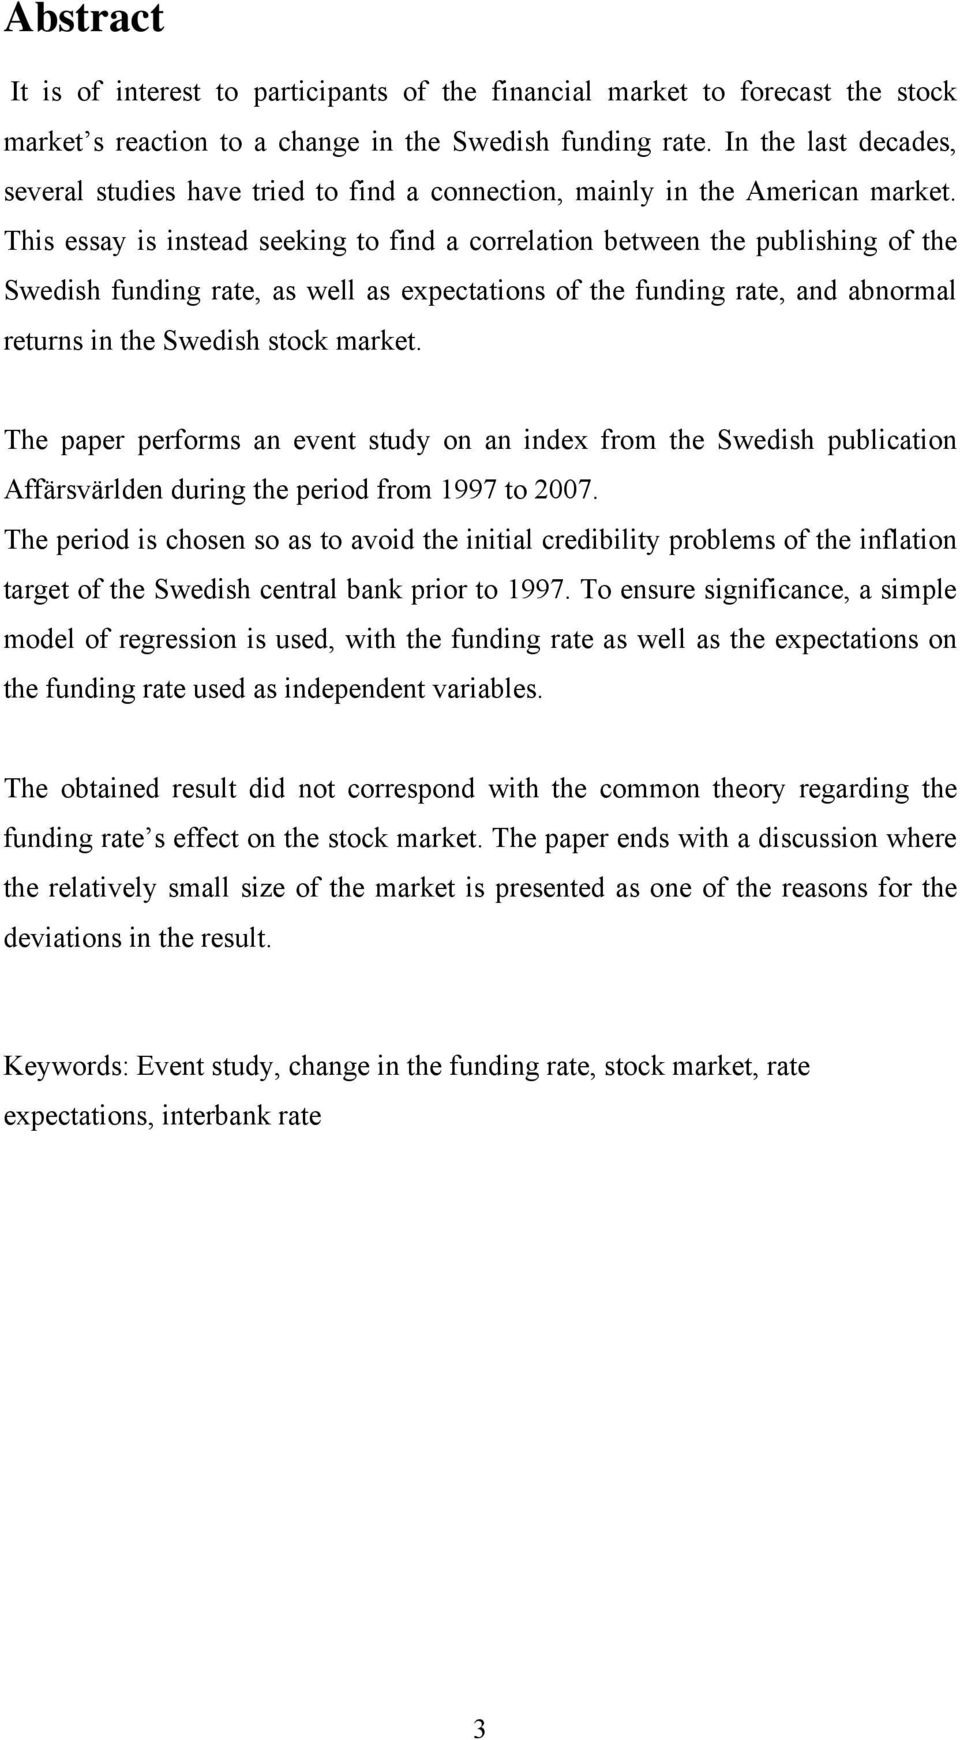 This essay is instead seeking to find a correlation between the publishing of the Swedish funding rate, as well as expectations of the funding rate, and abnormal returns in the Swedish stock market.